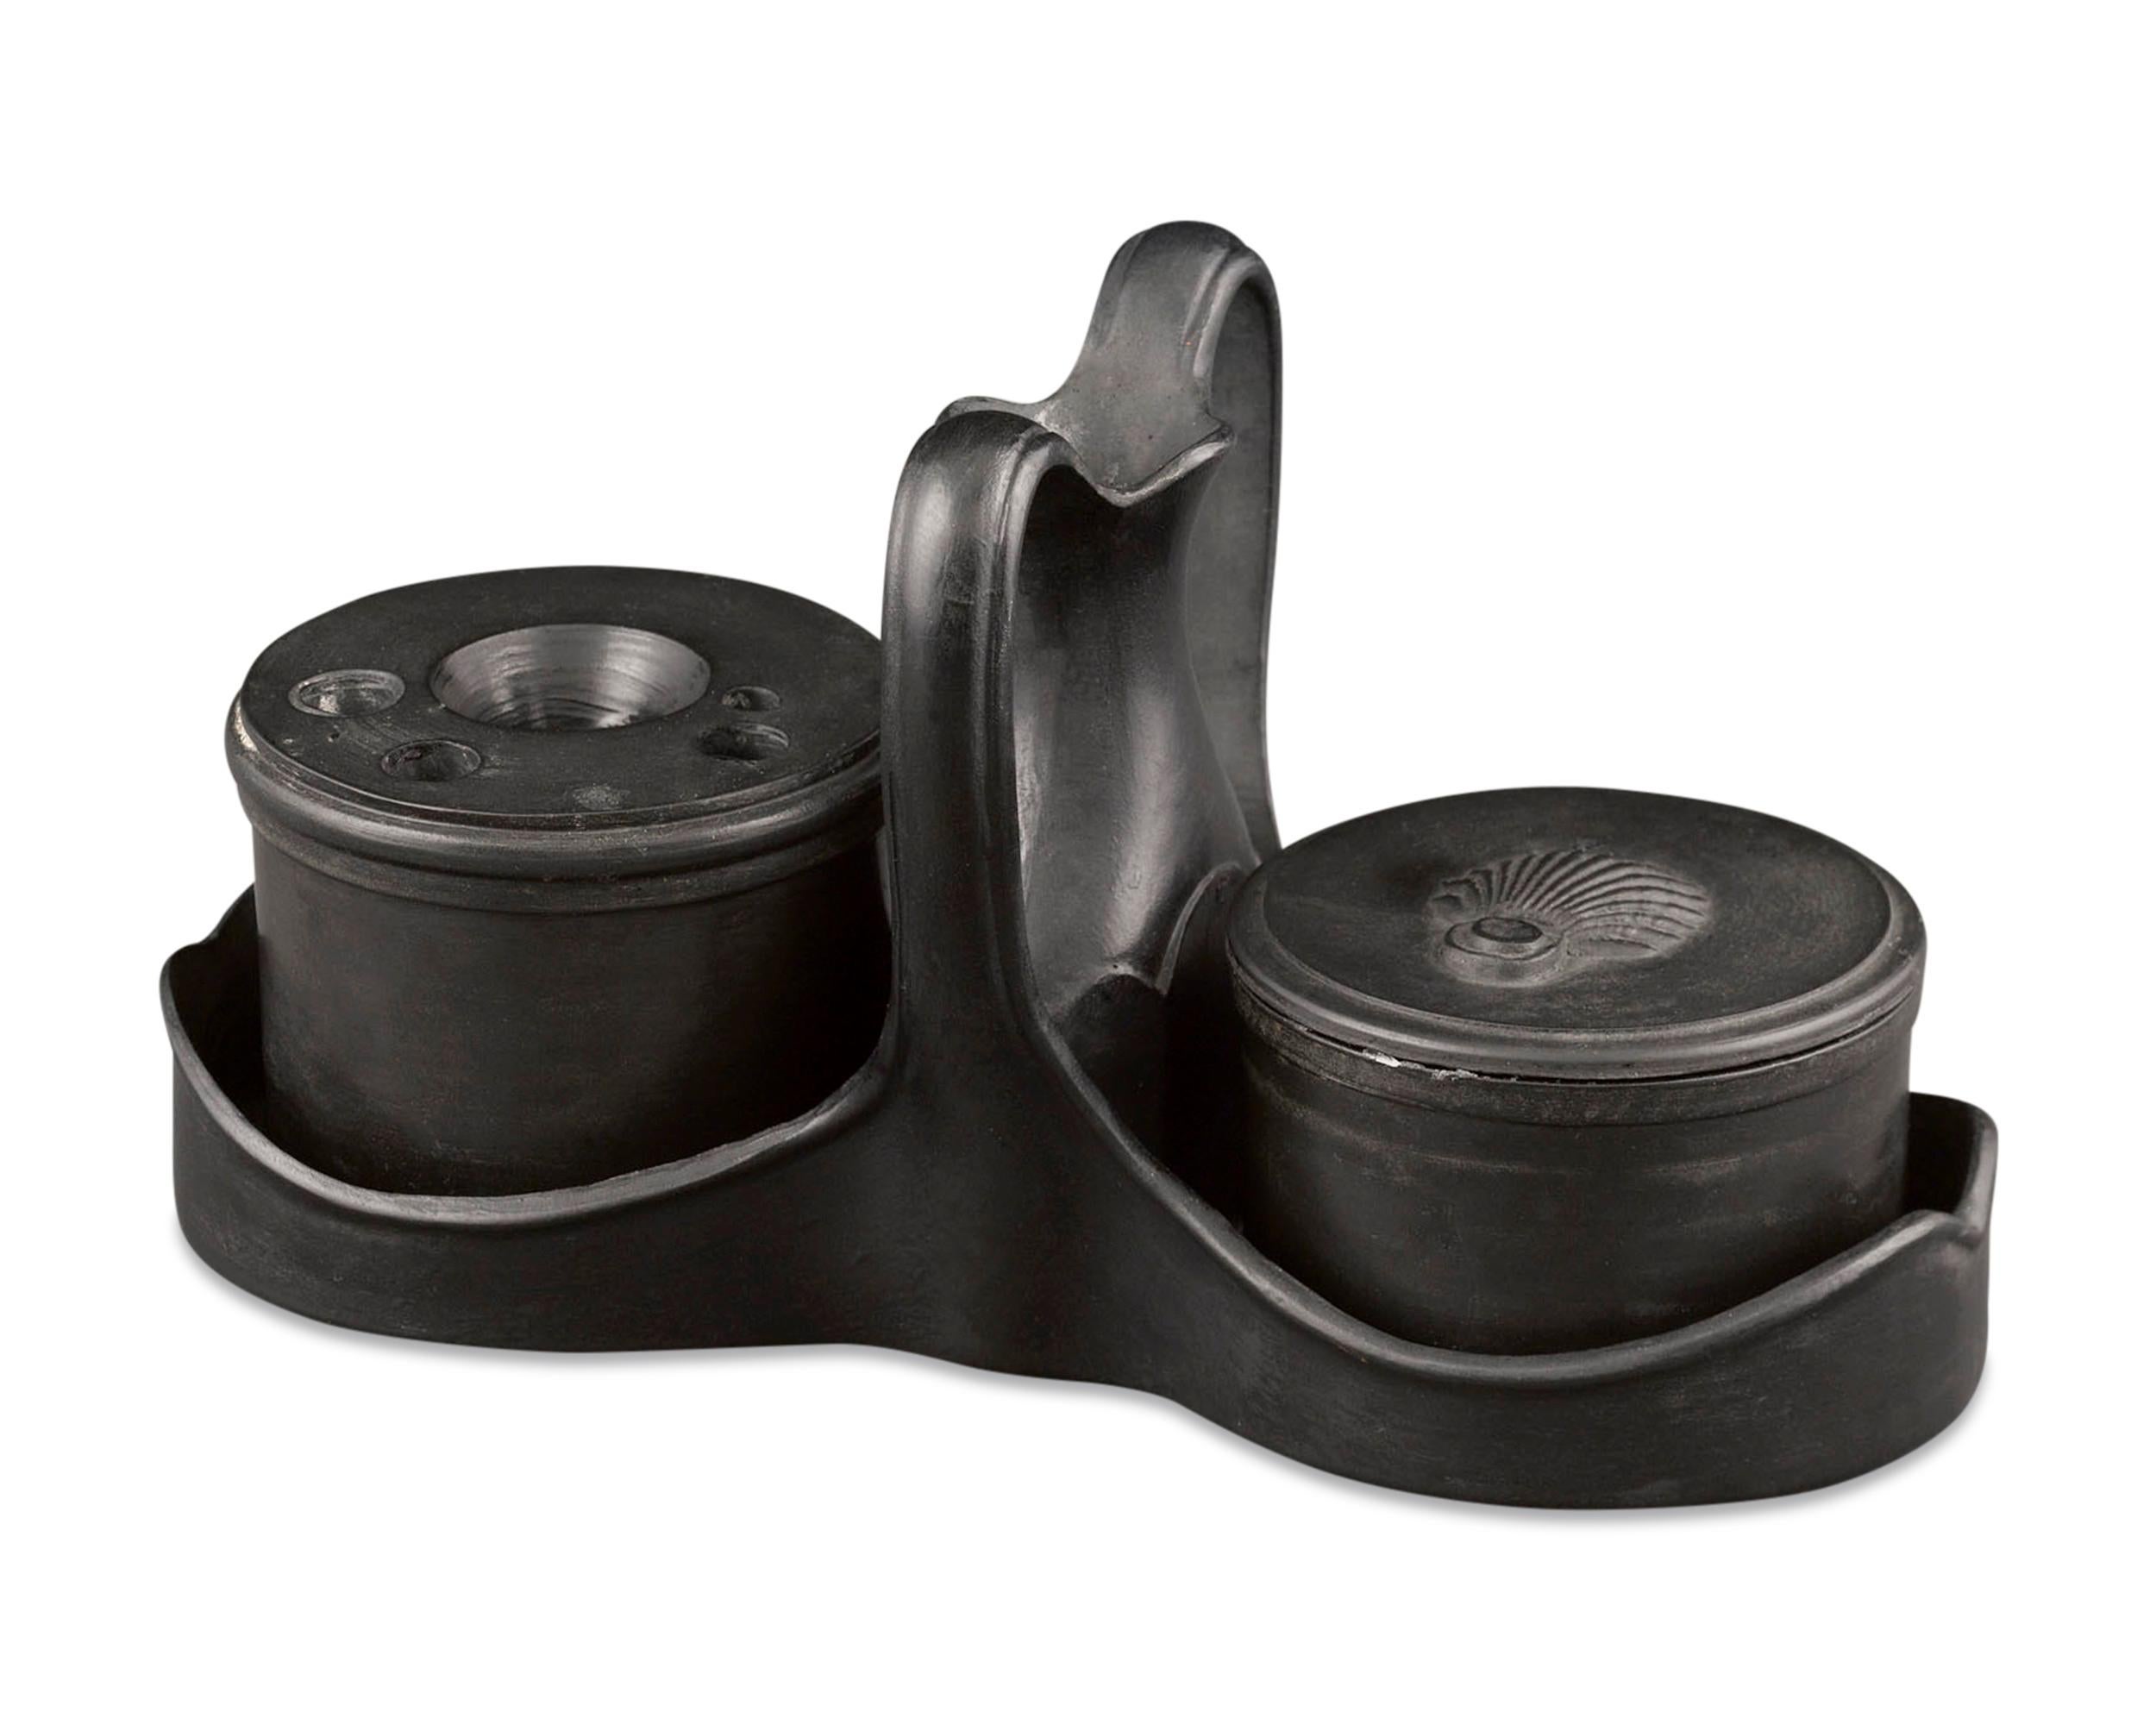 This elegant inkwell set by Wedgwood & Bentley is crafted of black basalt, one of Wedgwood’s finest inventions. The set is comprised of two canisters, both held within an intriguing double stand. One is designed to hold ink and features a top with